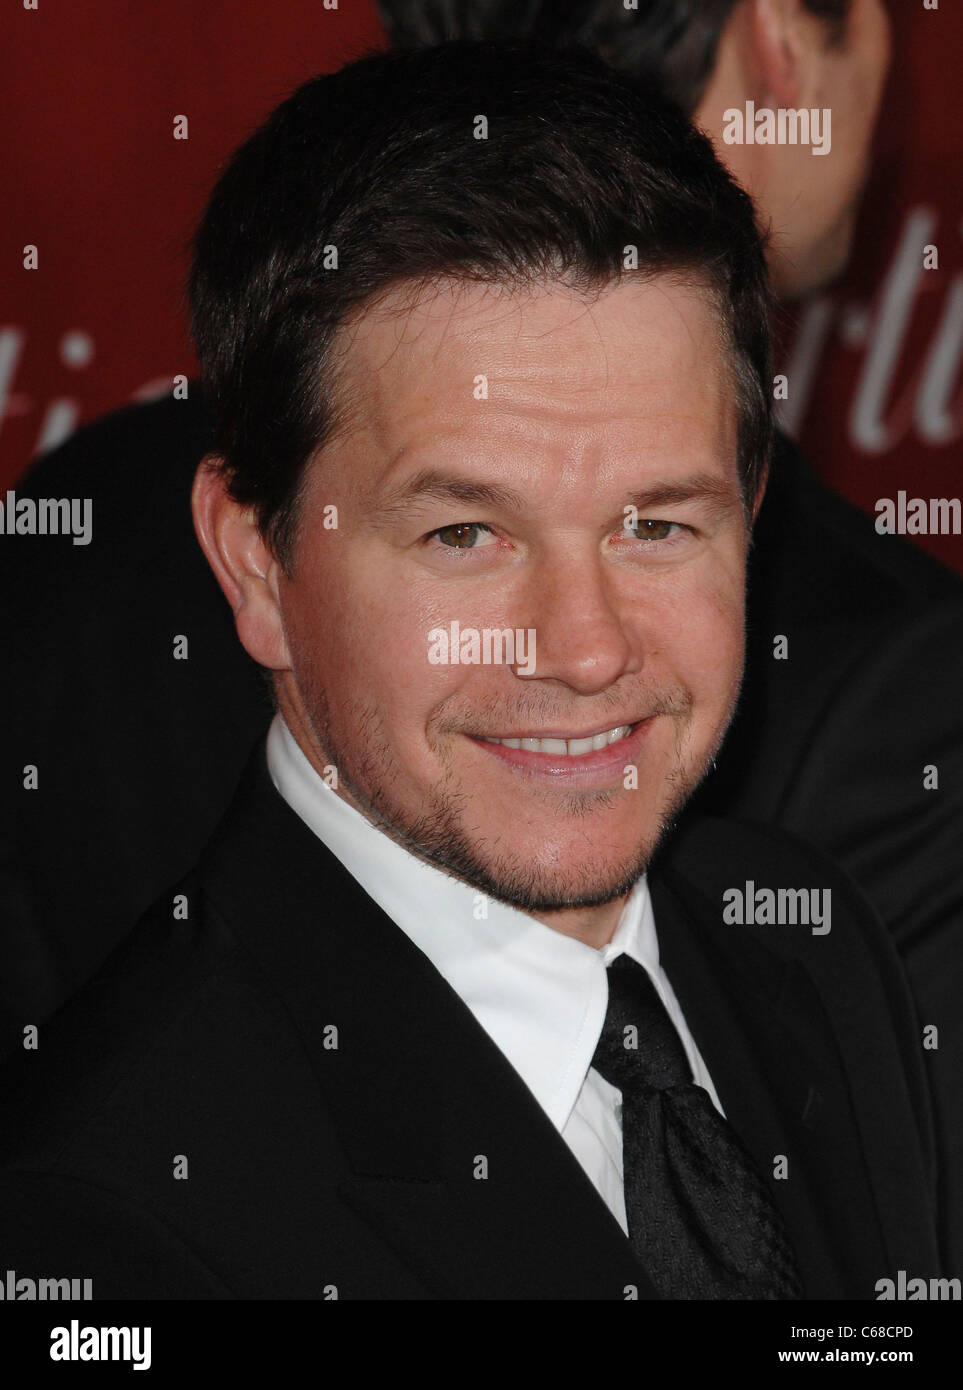 Mark Wahlberg at arrivals for 22nd Annual Palm Springs International Film Festival Awards Gala, Palm Springs Convention Center, Stock Photo